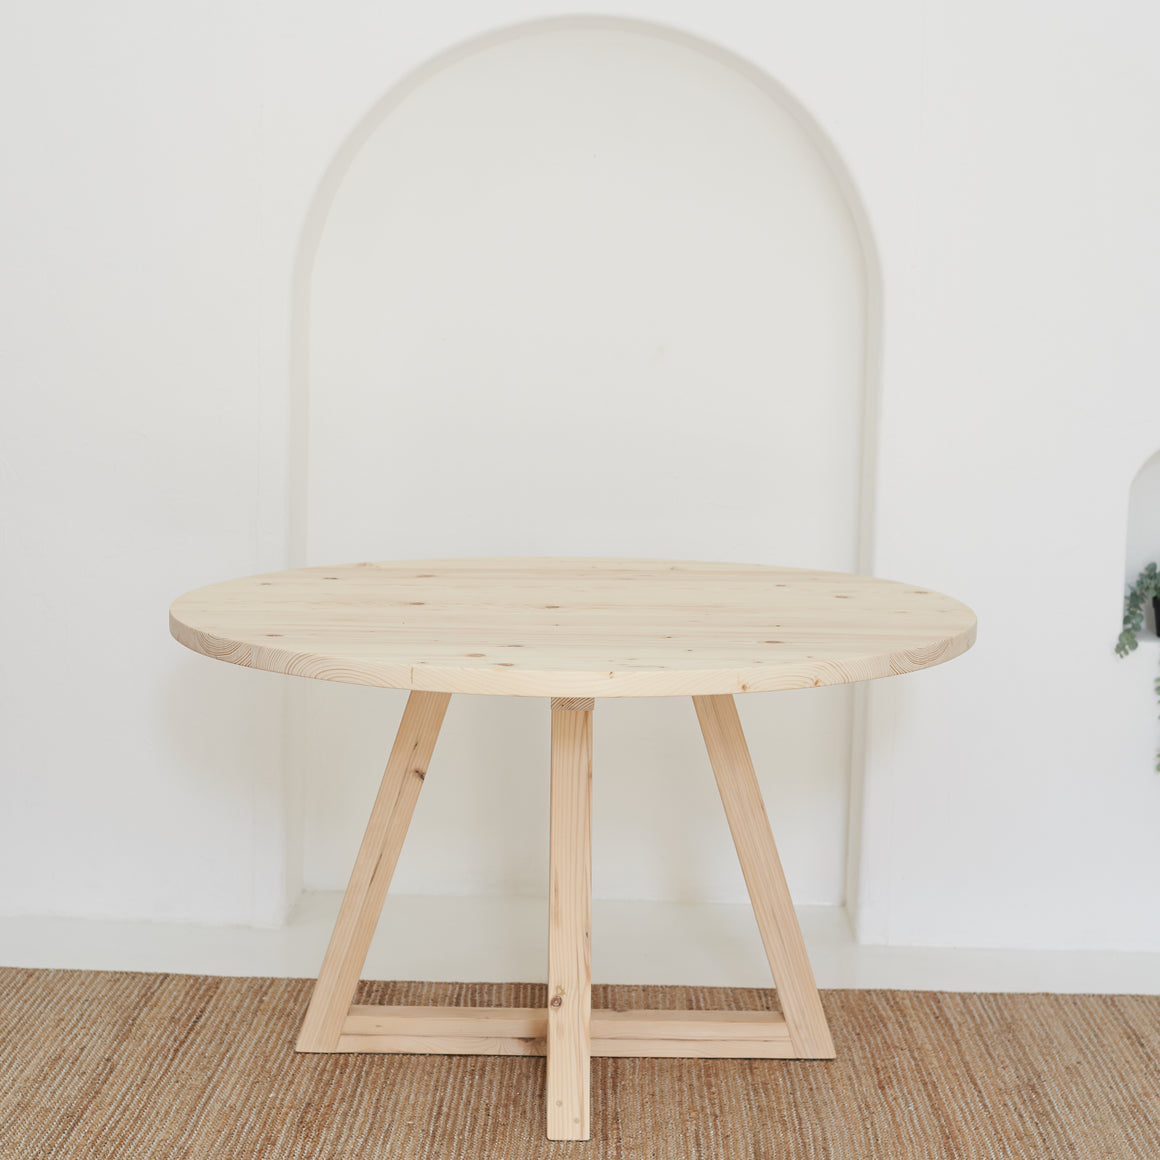 PEG+ Round Dining Table by Tribe [Custom Made]